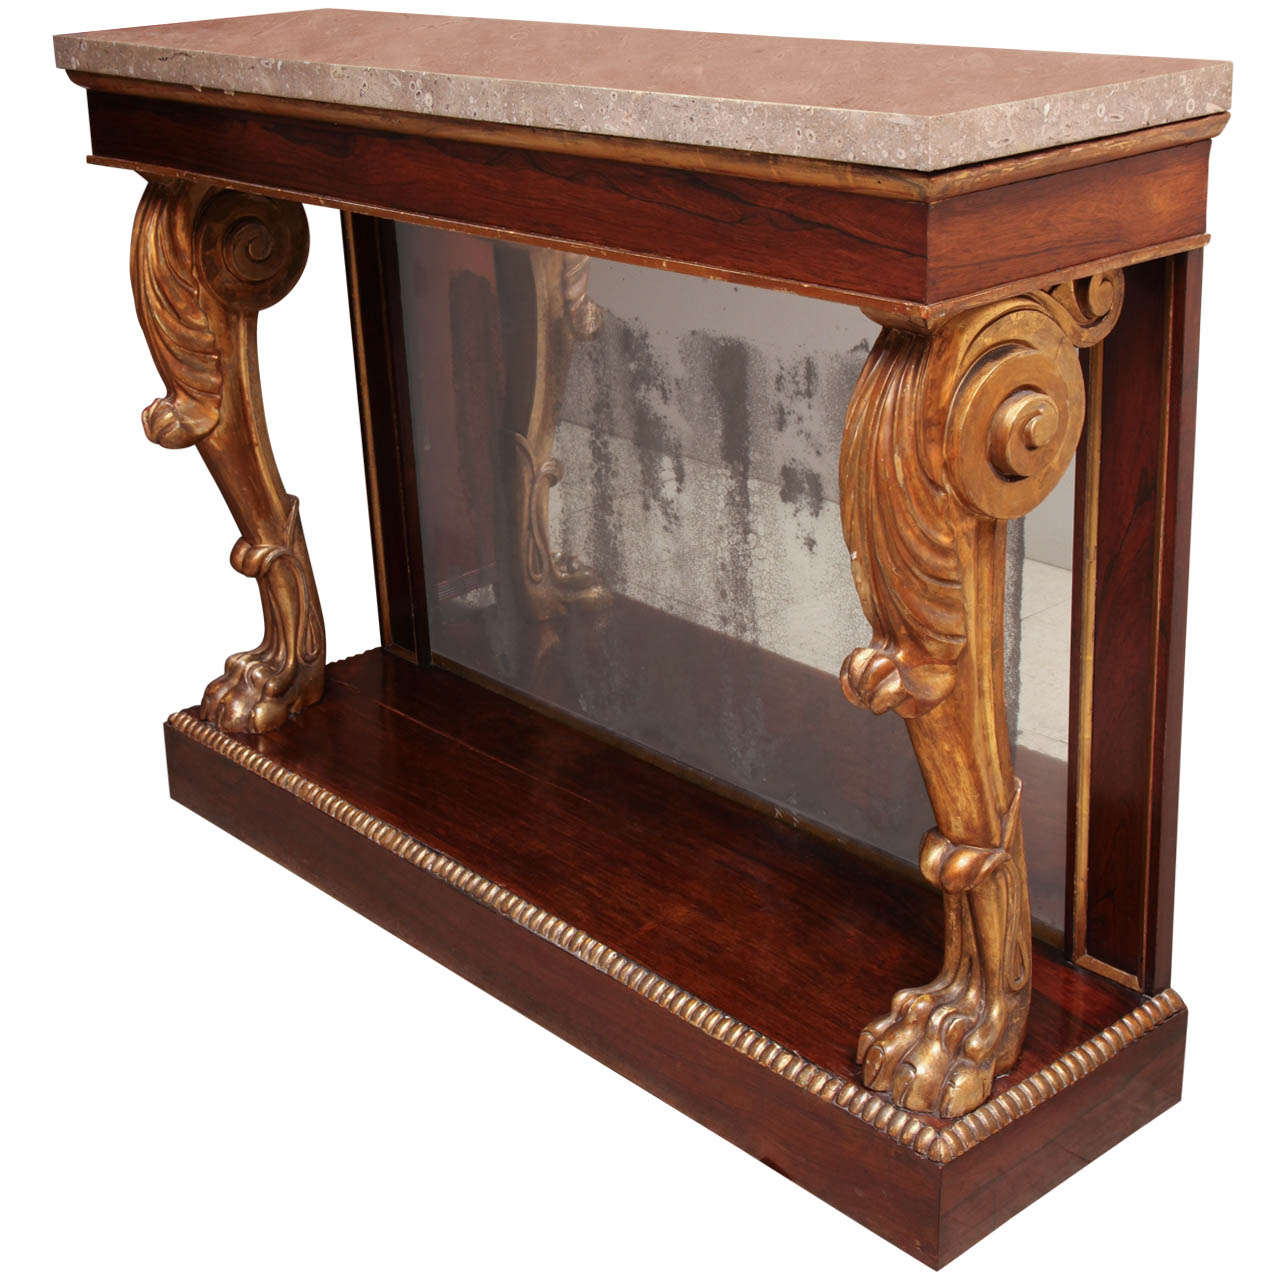 Early 19th Century English, Parcel Gilt Console with Later Fossilized Stone Top For Sale